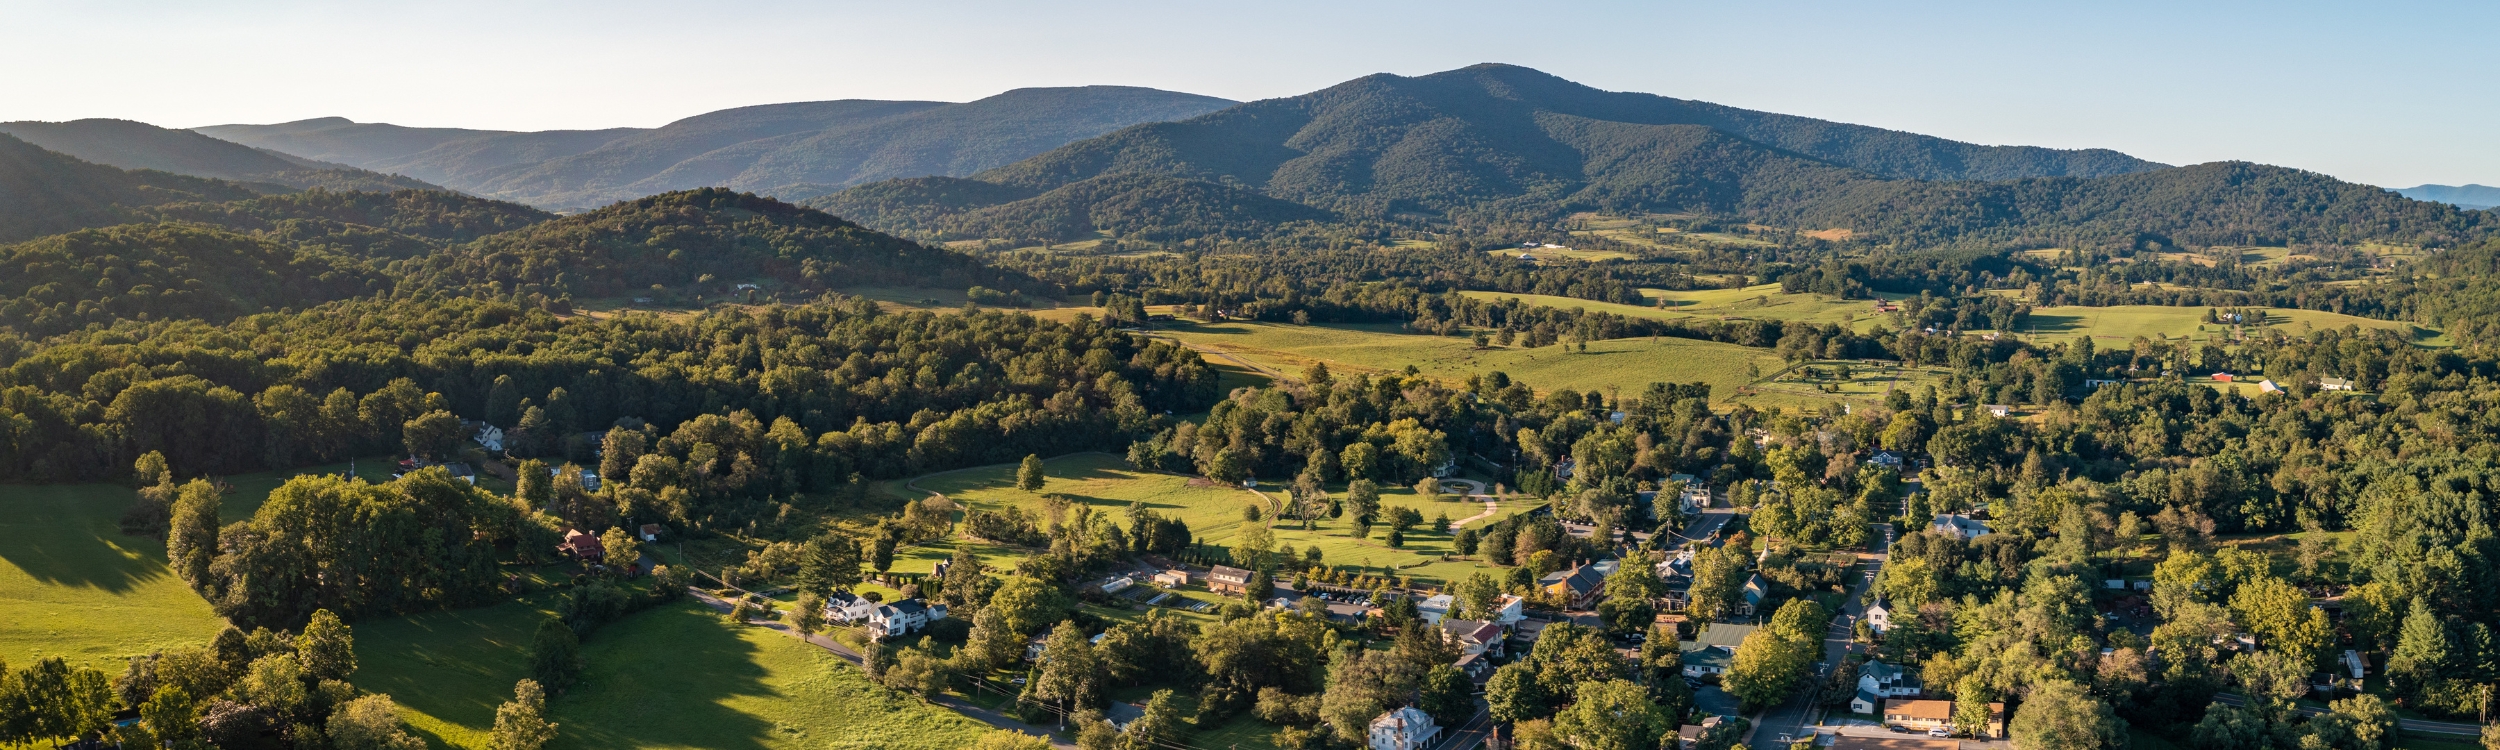 aerial view of green mountains and a small town during late afternoon light